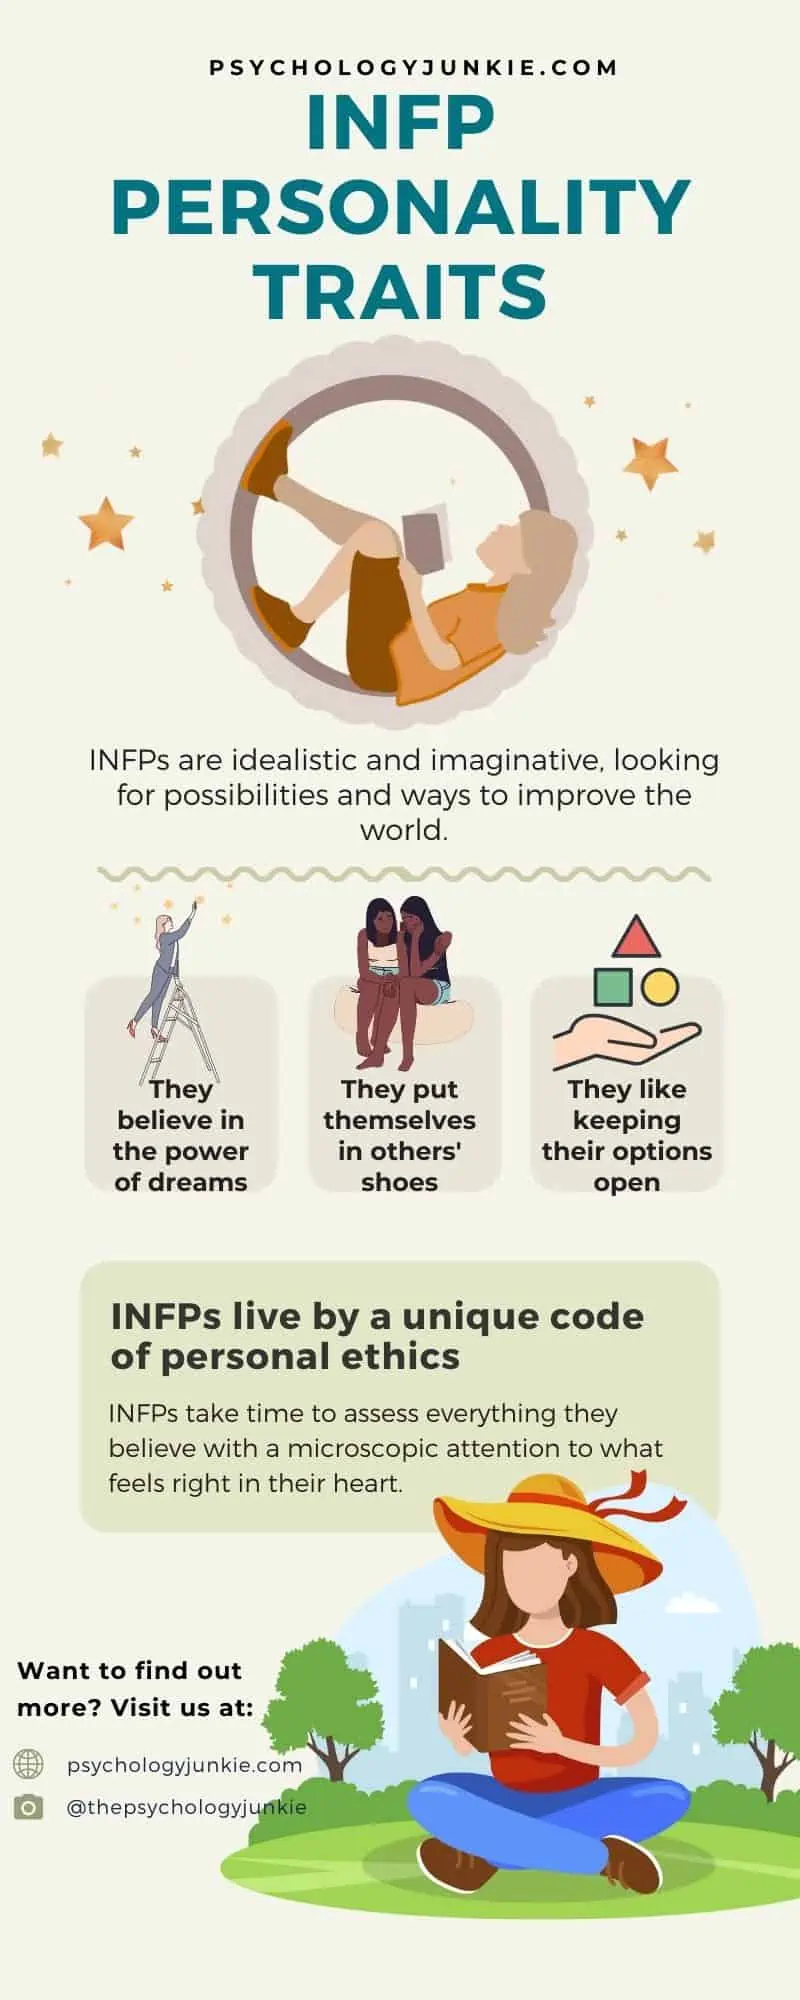 INFP: Characteristics, Careers, & Tips for the INFP Type